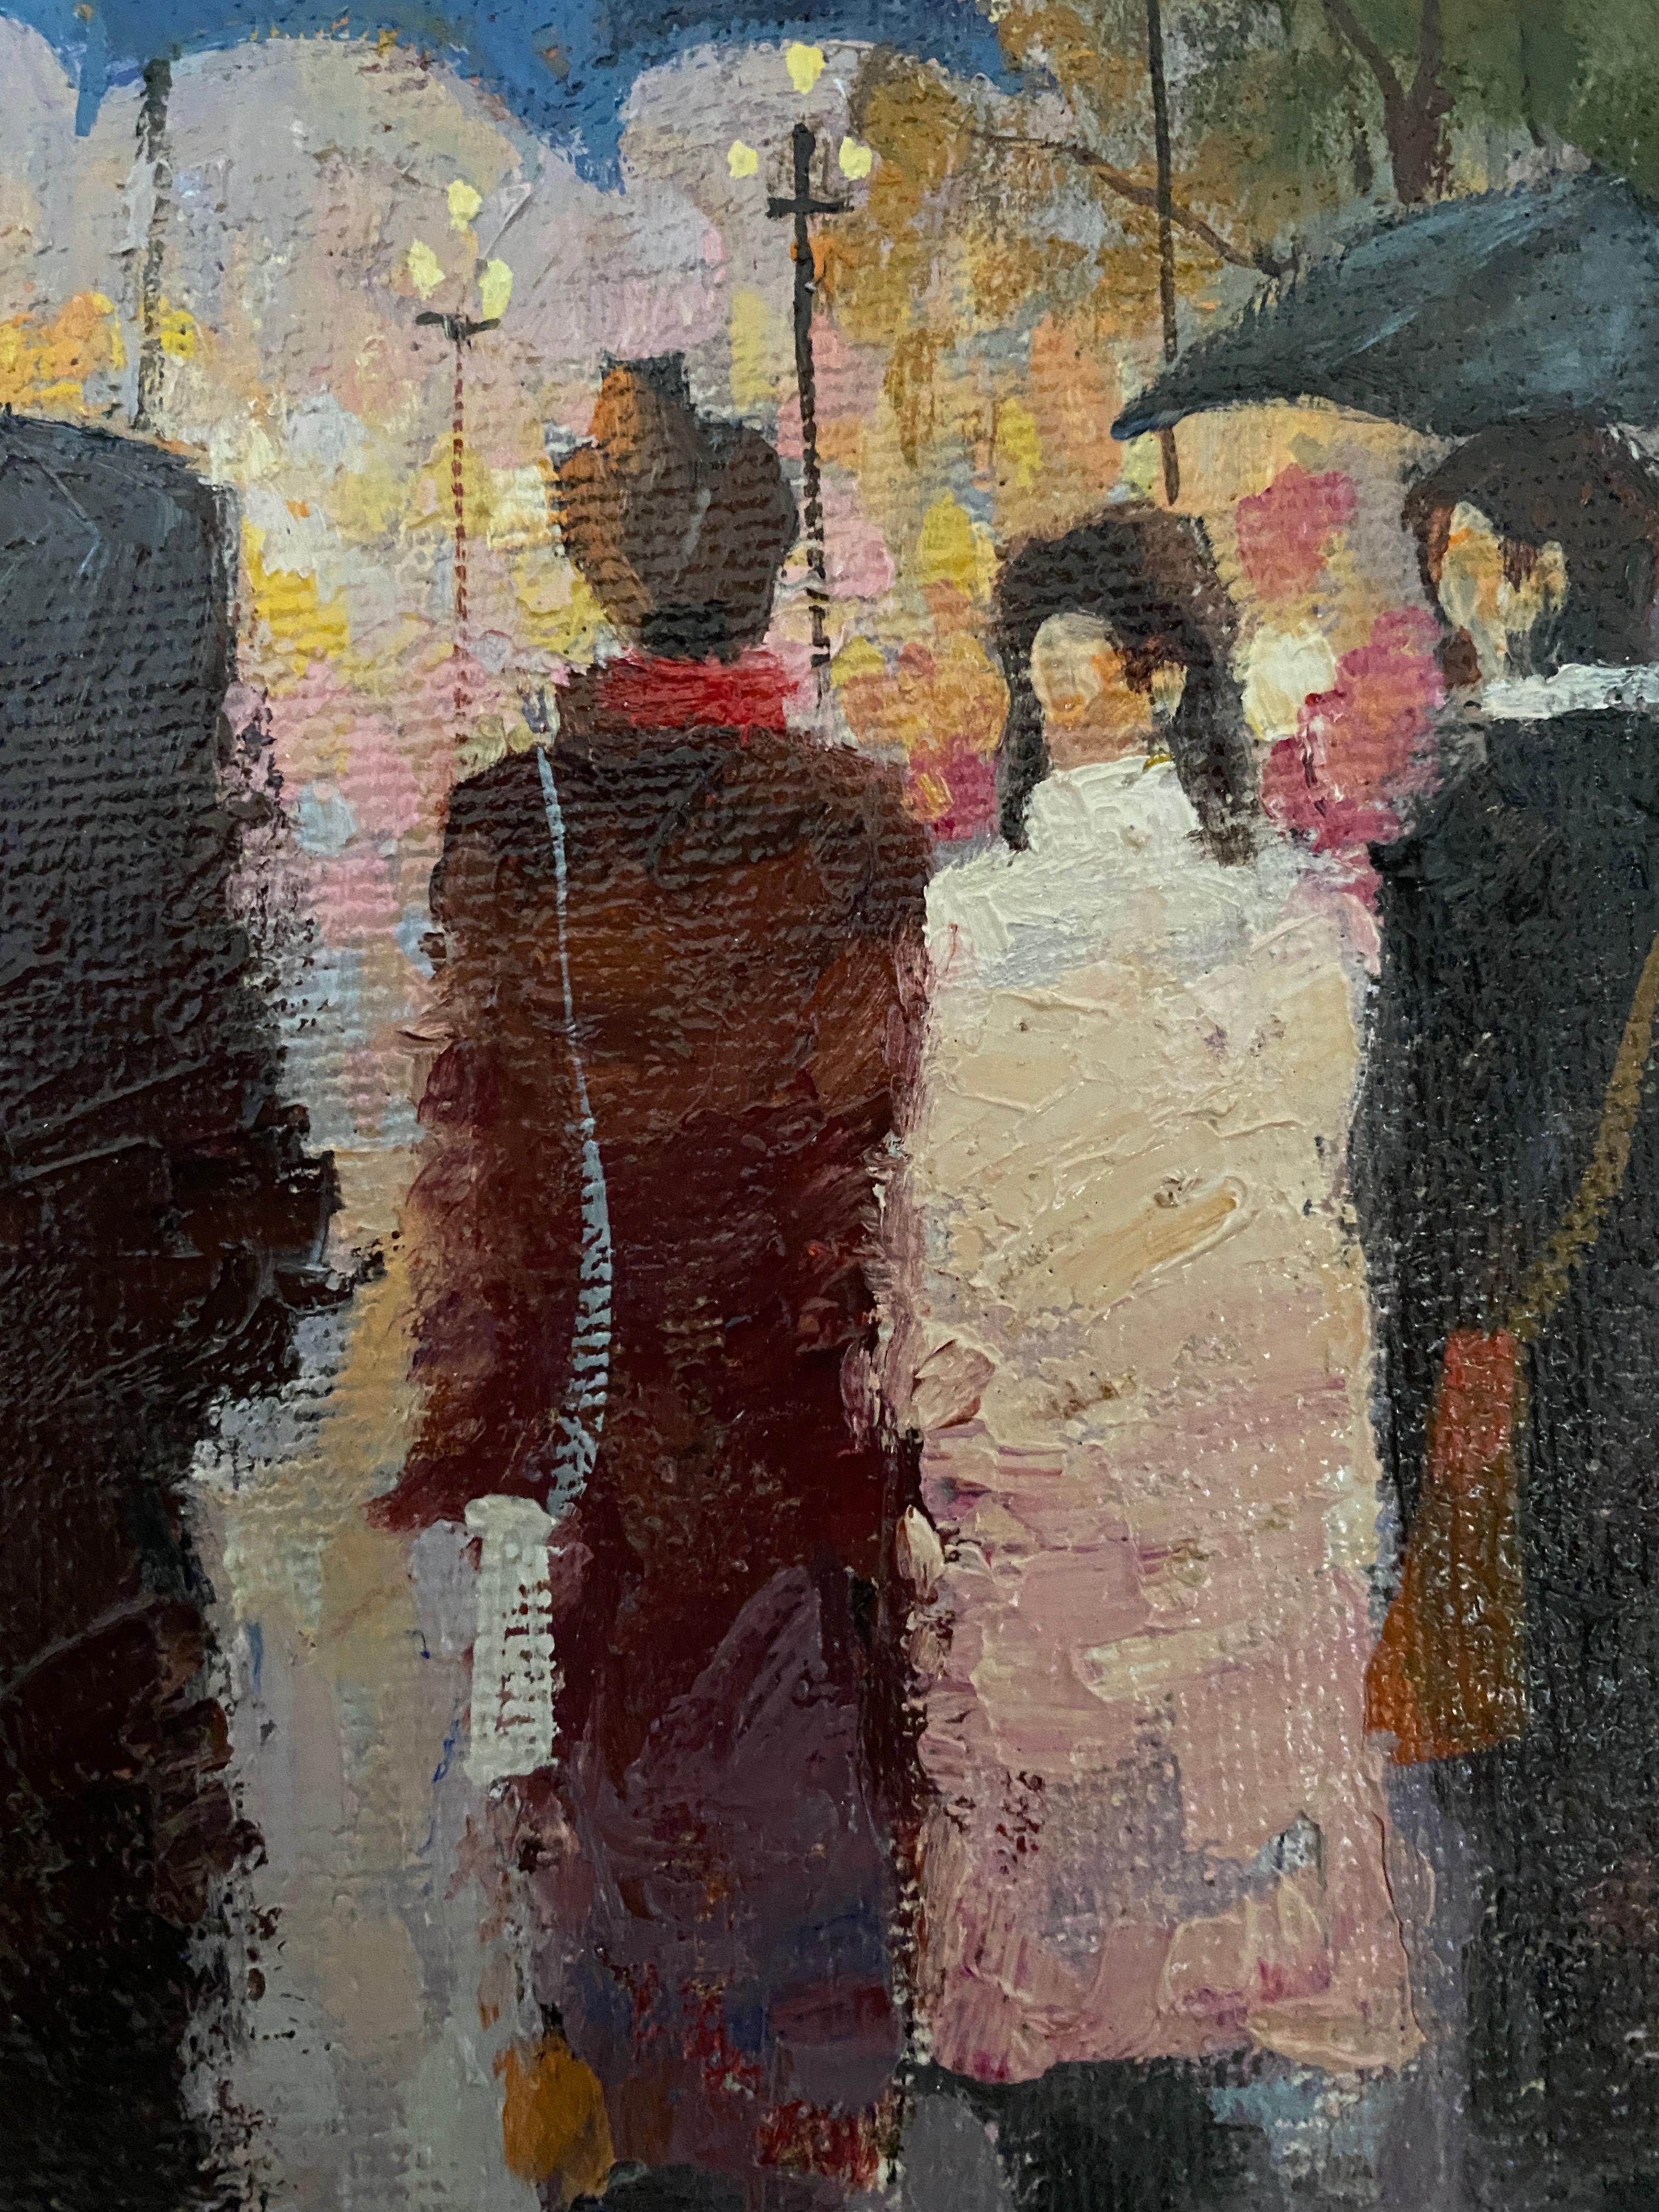 Rainy day. Oil on canvas. Impressionistic colorful street scene. For Sale 3